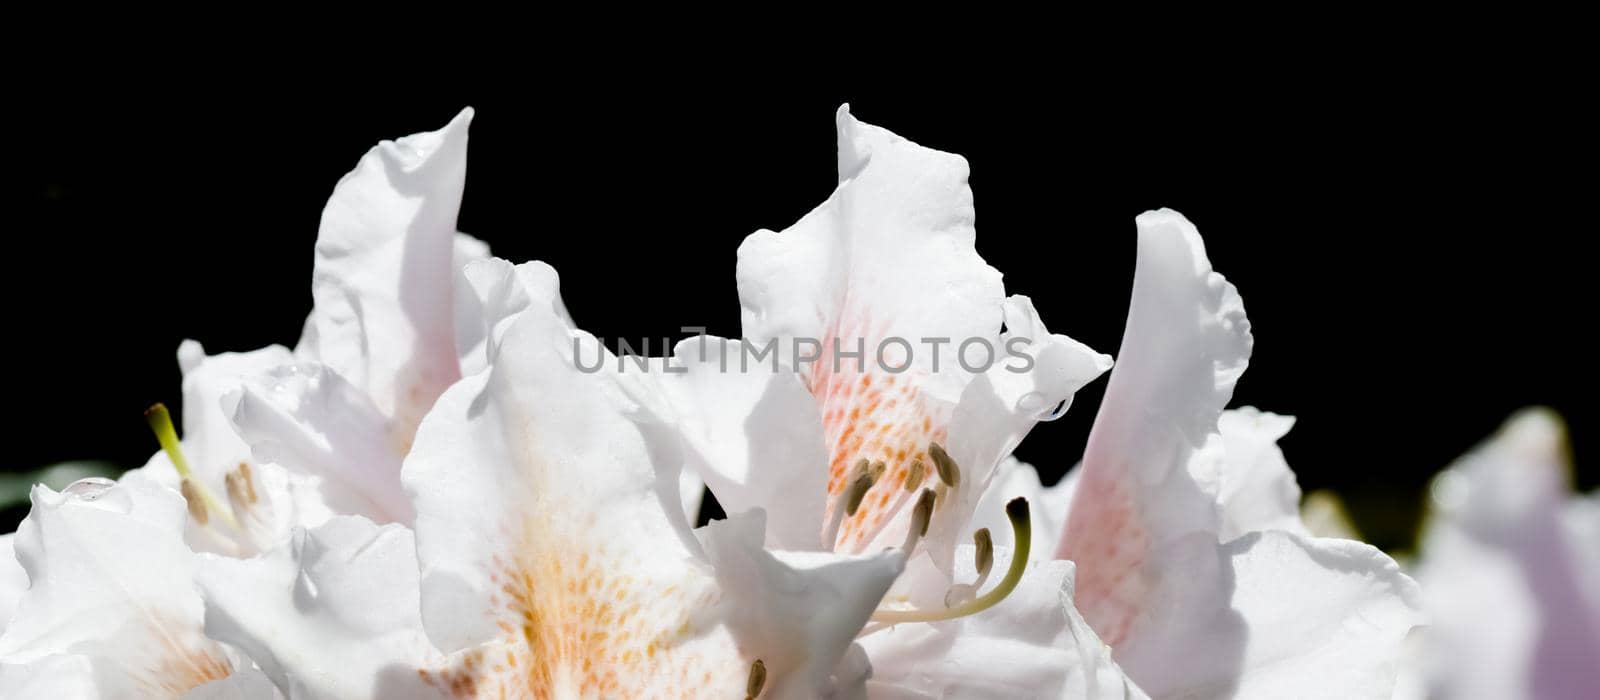 Blooming white rhododendron flower isolated on a black background